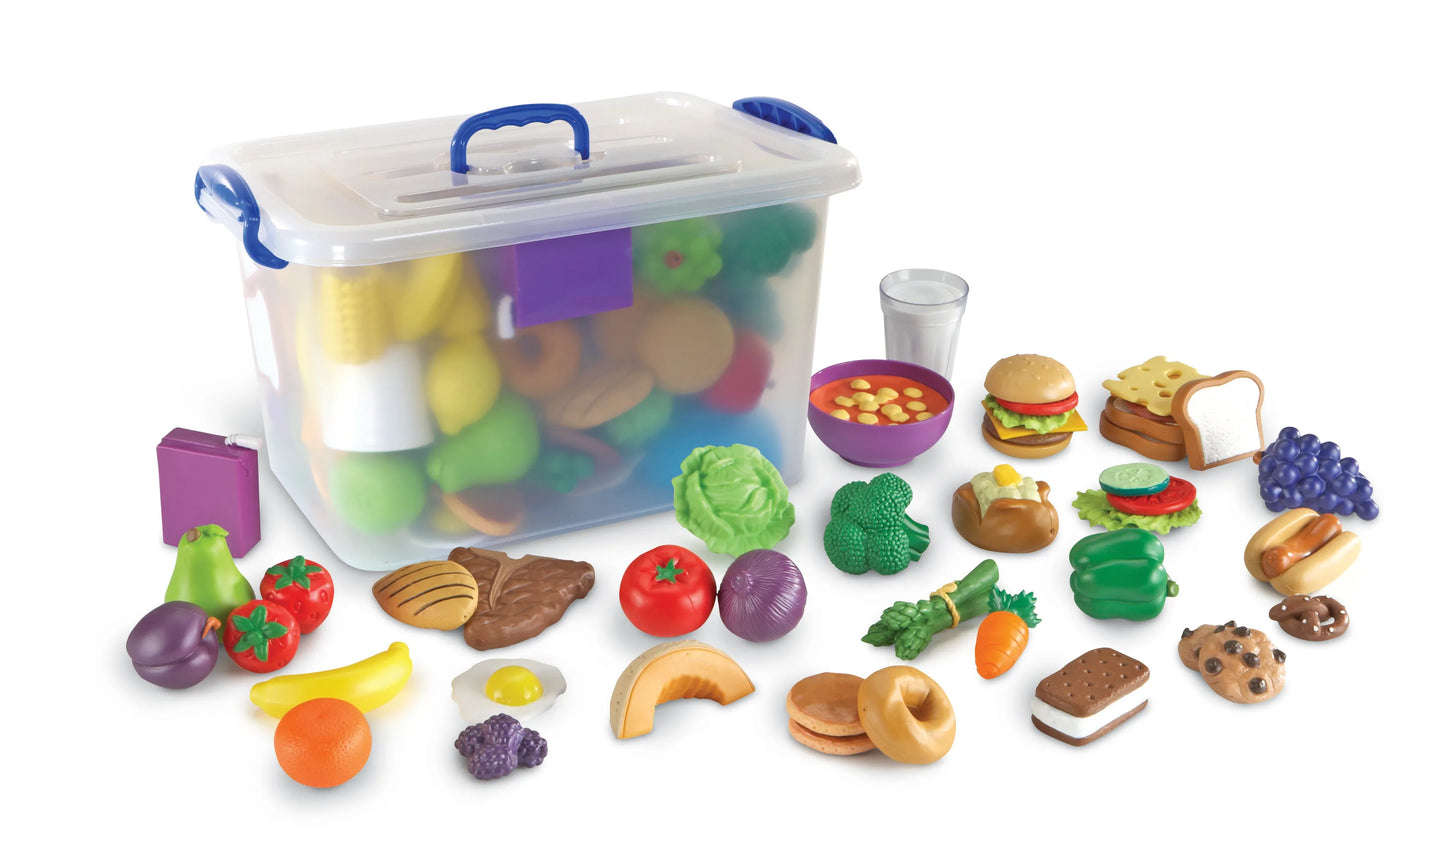 Learning Resources New Sprouts Classroom Play Food Set